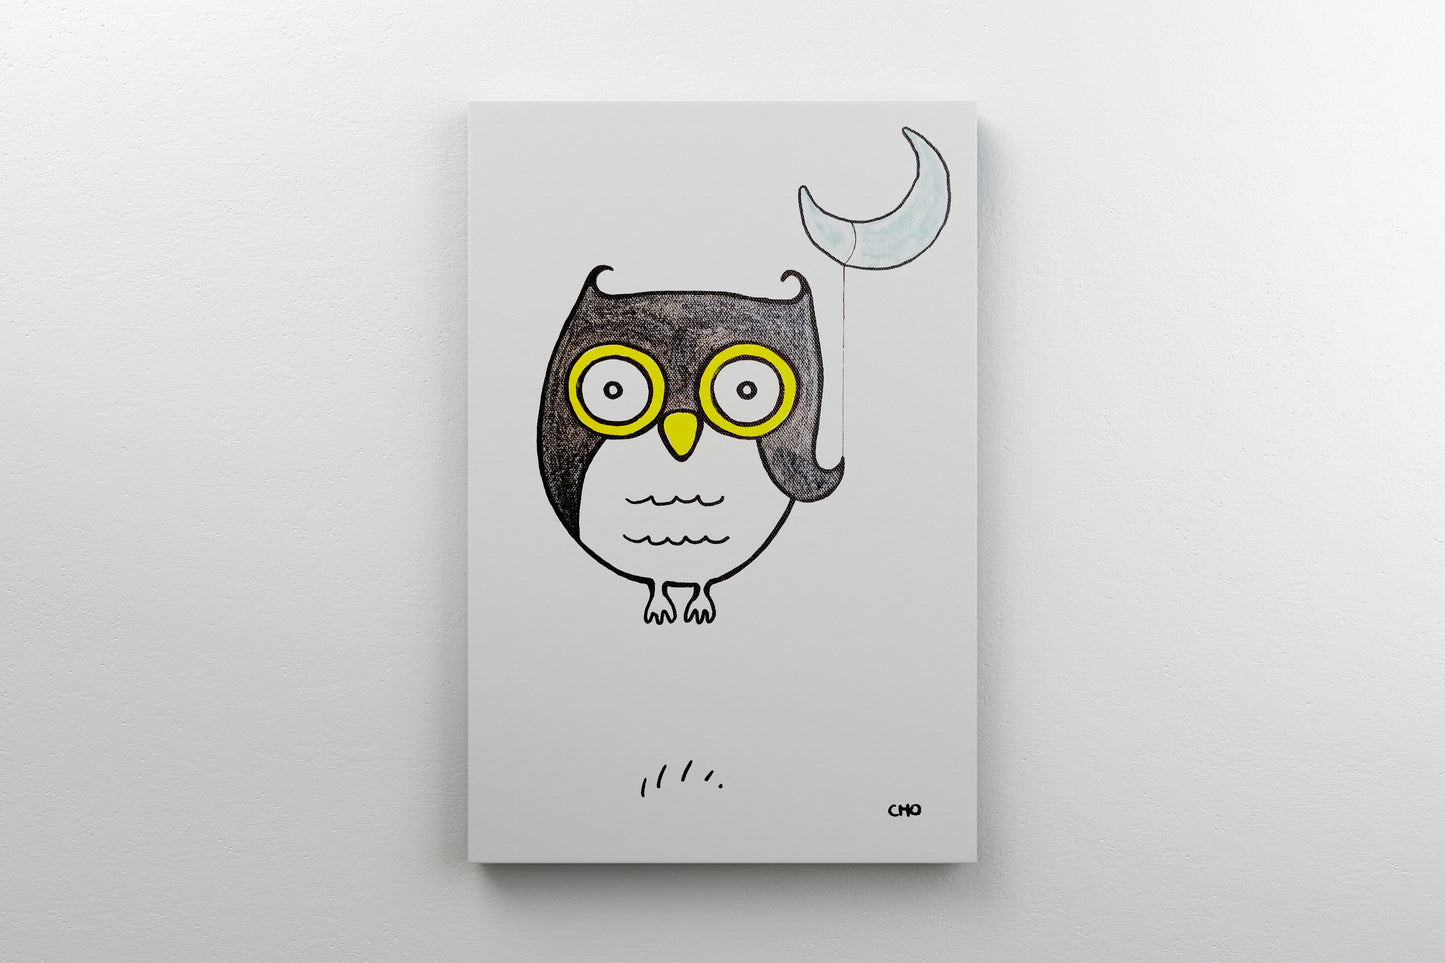 Night Owl by Wendy Cho, Once Upon a Design